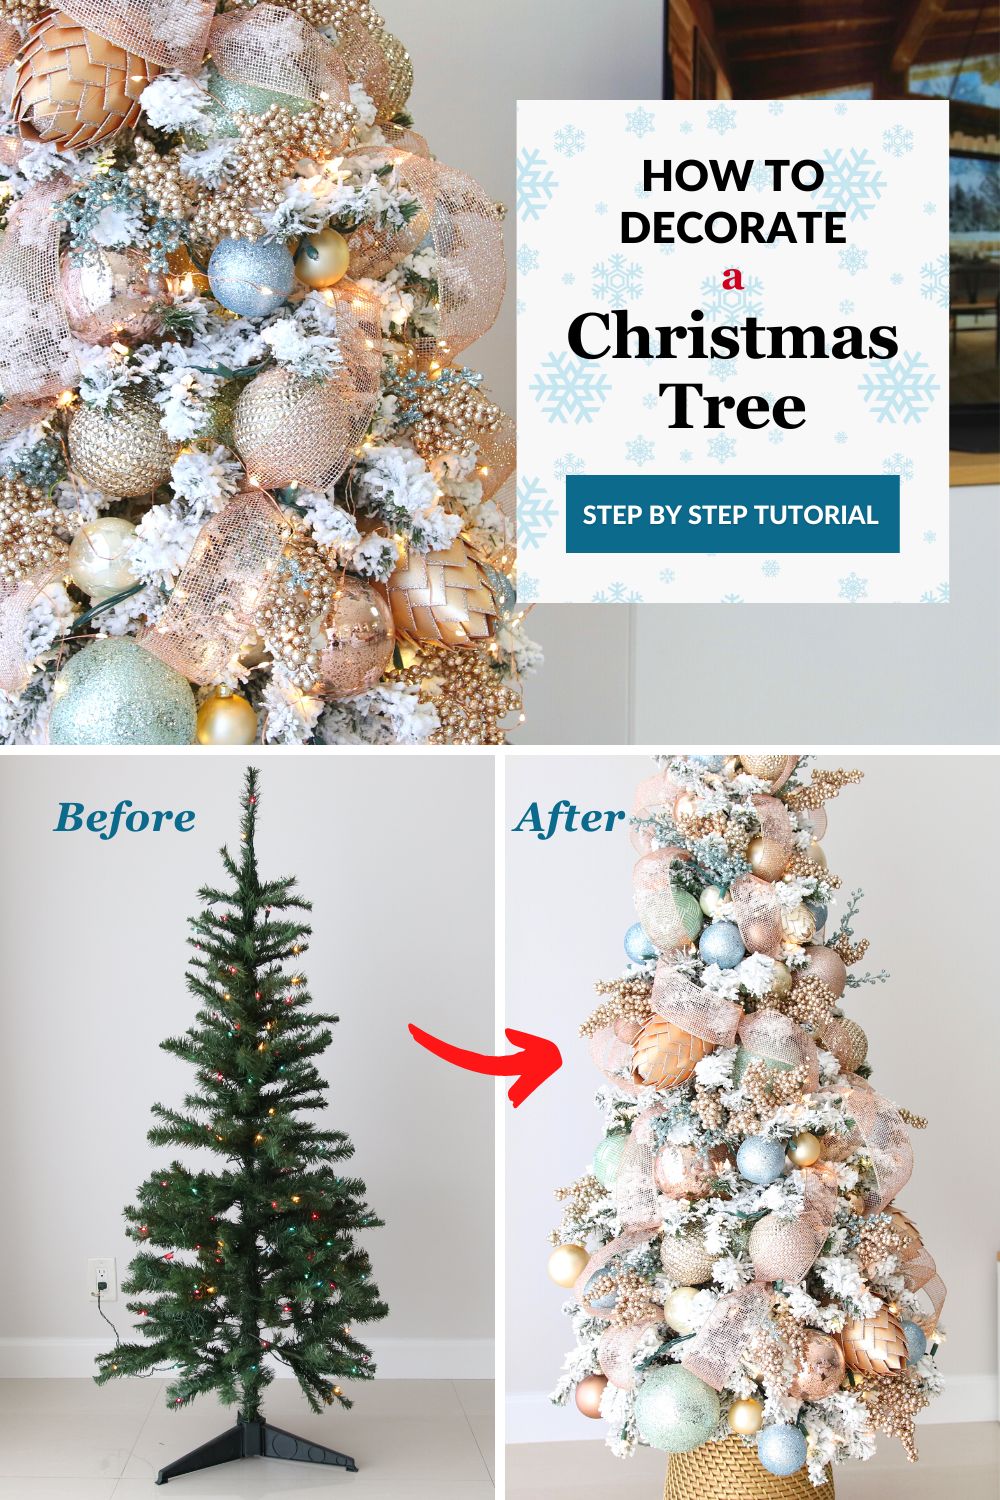 How to decorate a Christmas tree tutorial